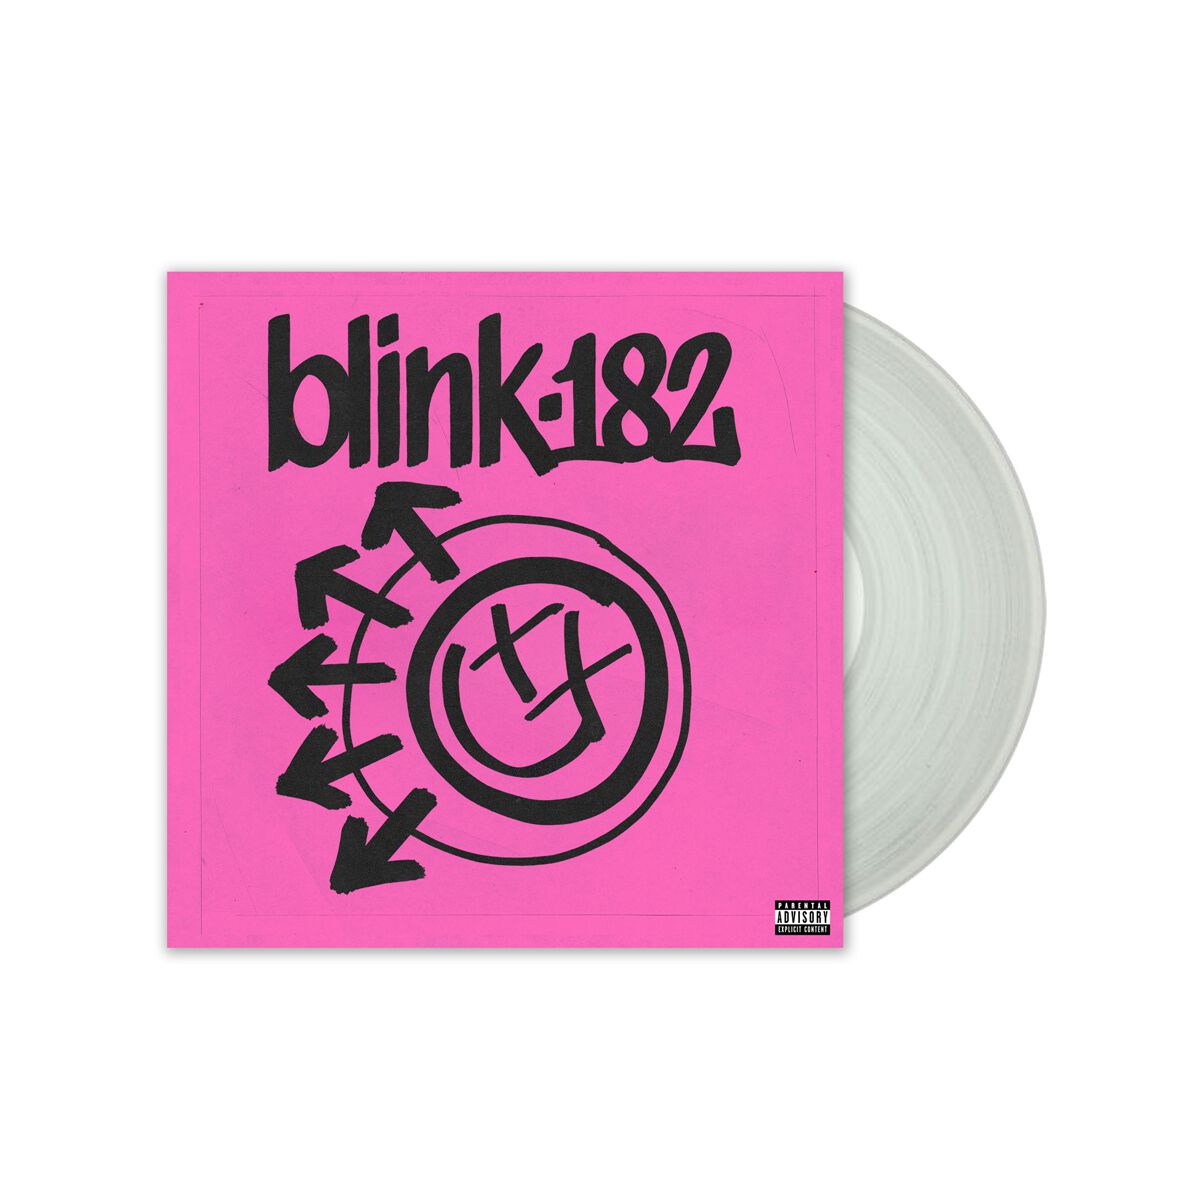 Blink-182 Release Two New Songs 'One More Time,' 'More Than You Know